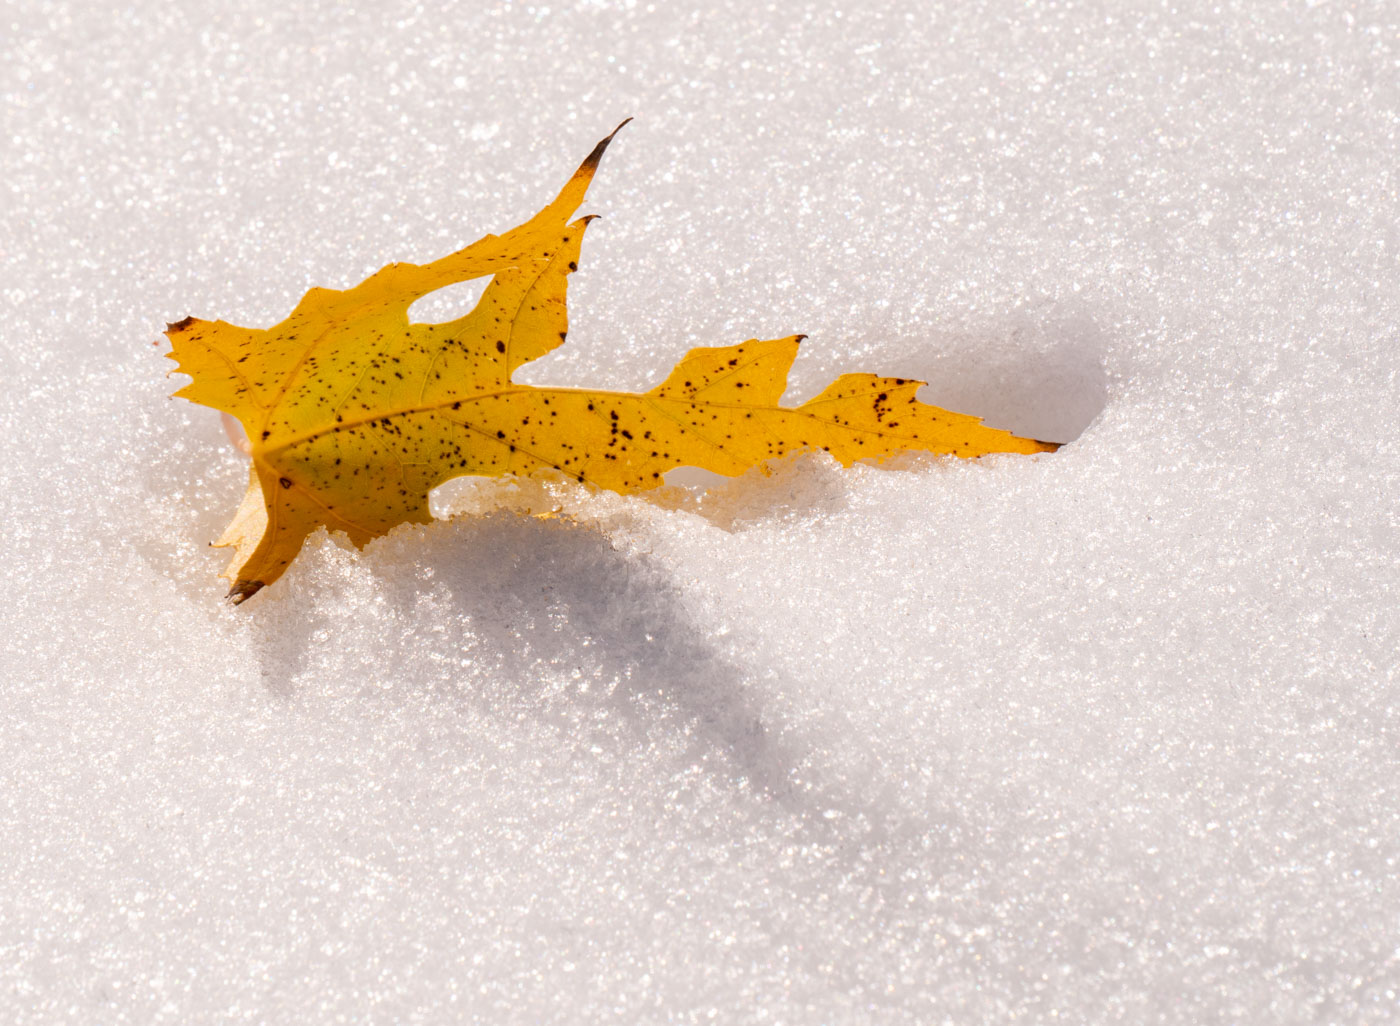 Snow and leaf.